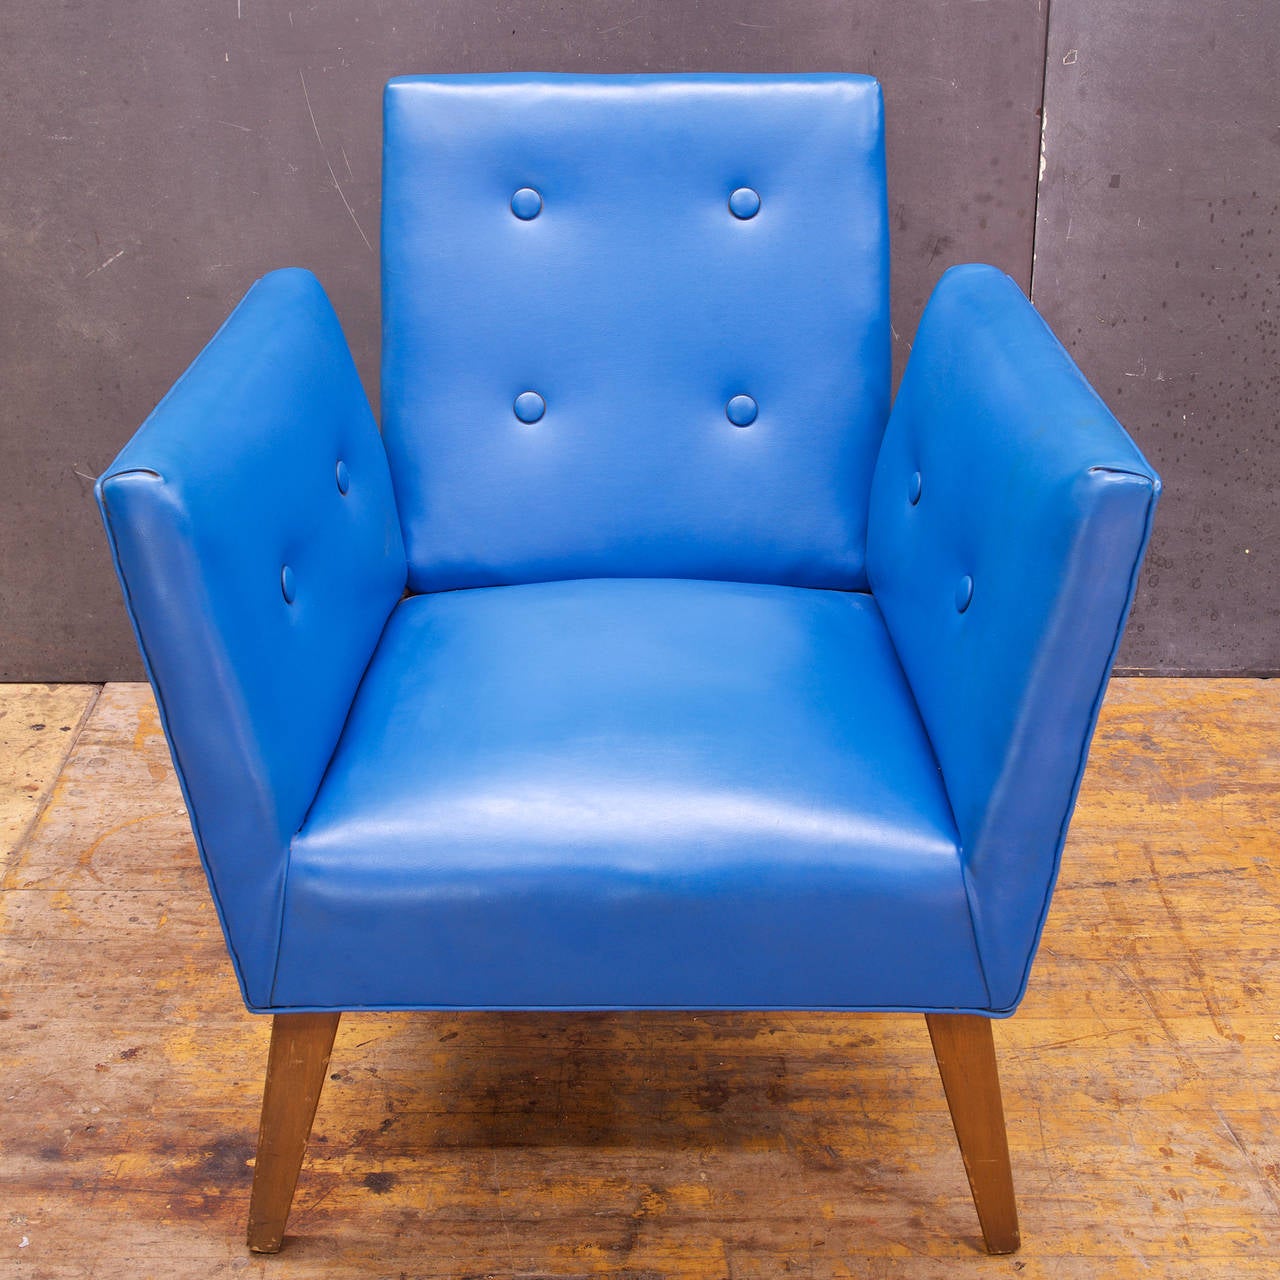 Armchair presented in As-Found condition, Foam is Supple. No Makers Mark, and is attributed to Jens Risom Designs.